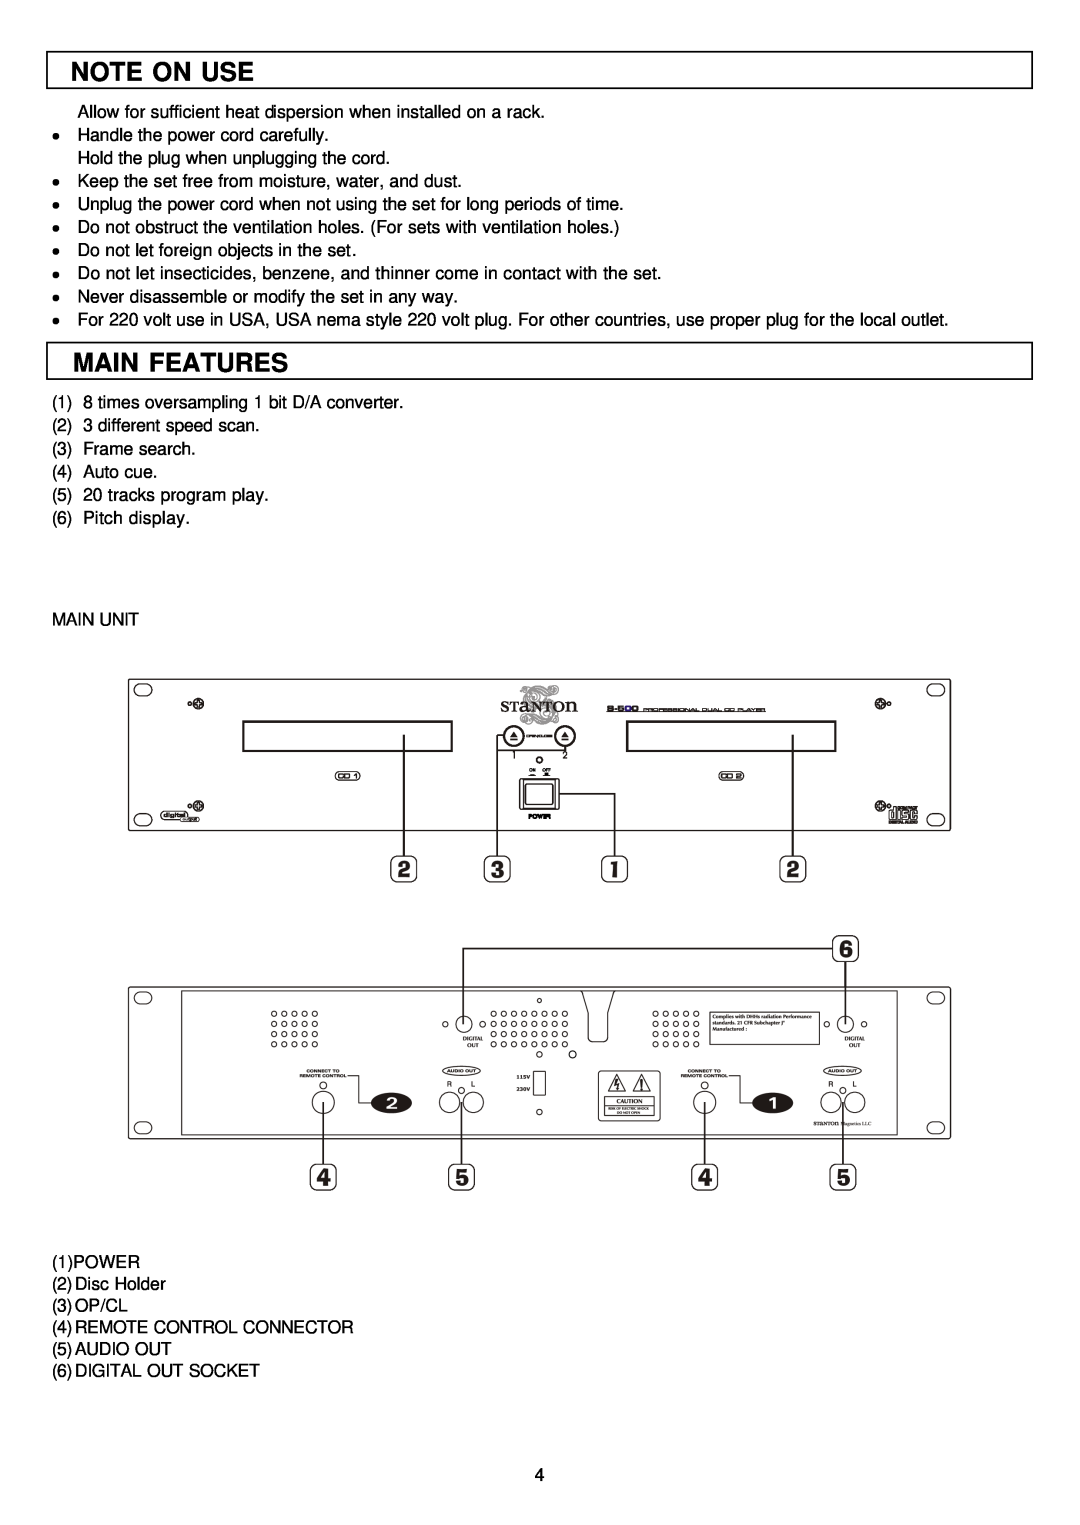 Stanton S-500 user manual Note On Use, Main Features 